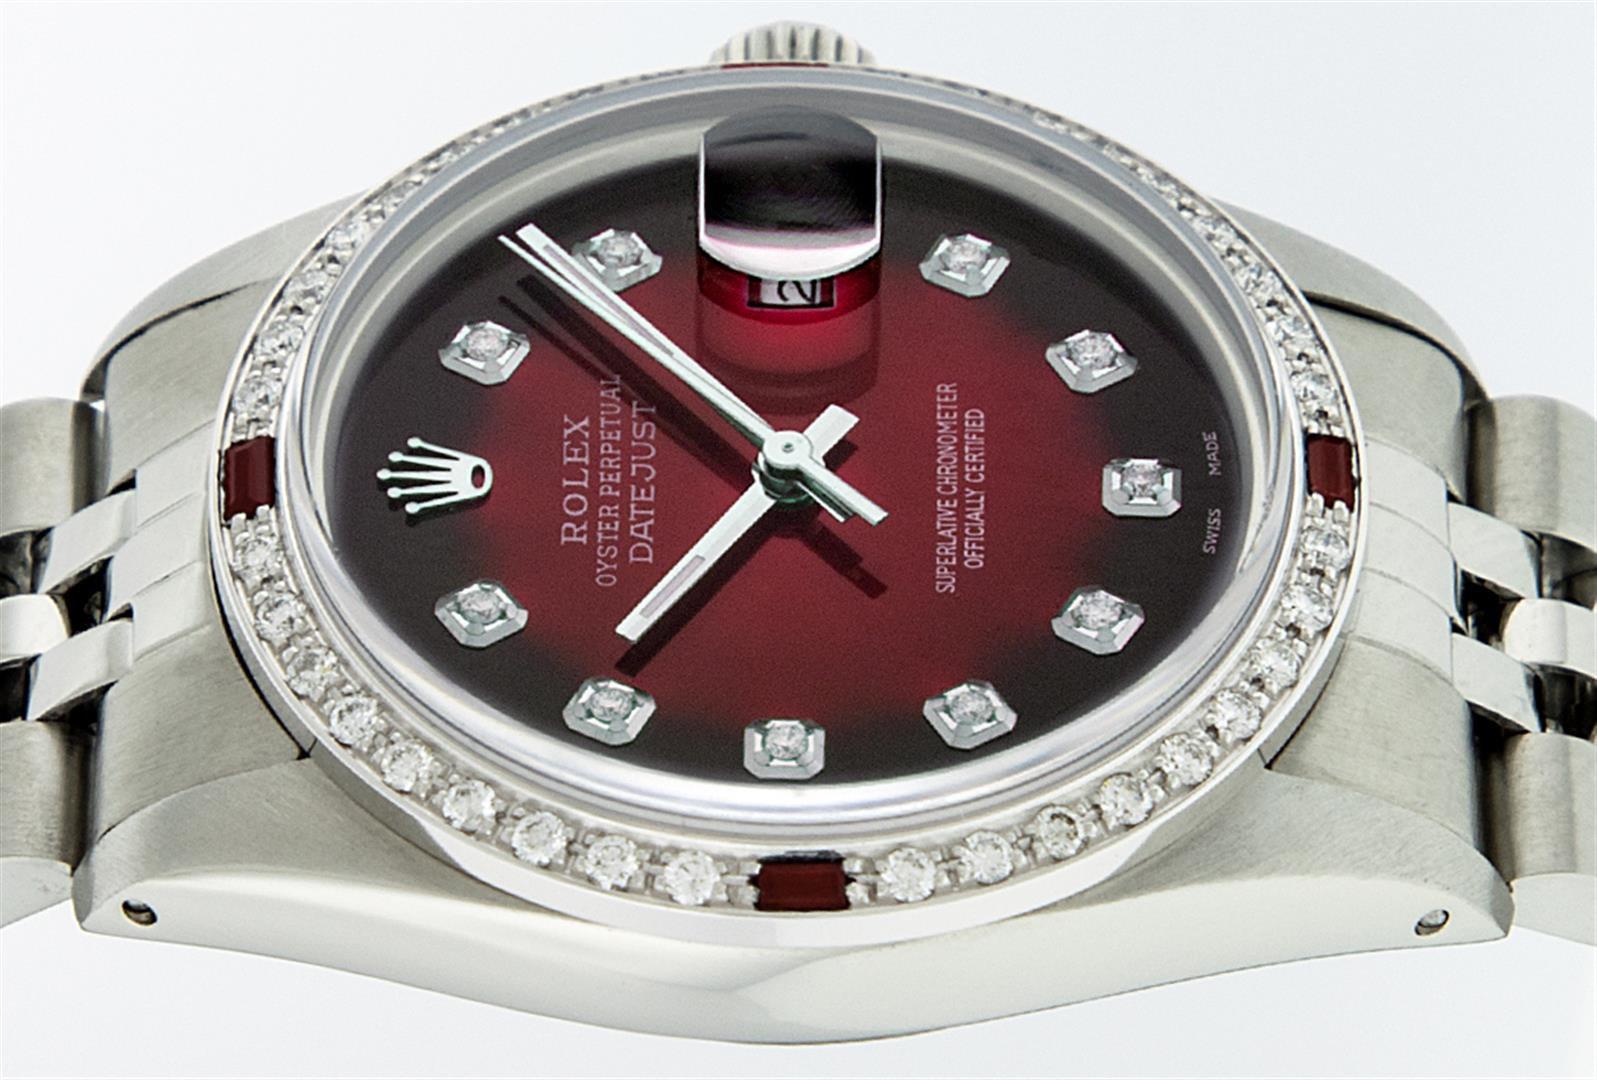 Rolex Stainless Steel 1.00 ctw Diamond and Ruby DateJust Men's Watch